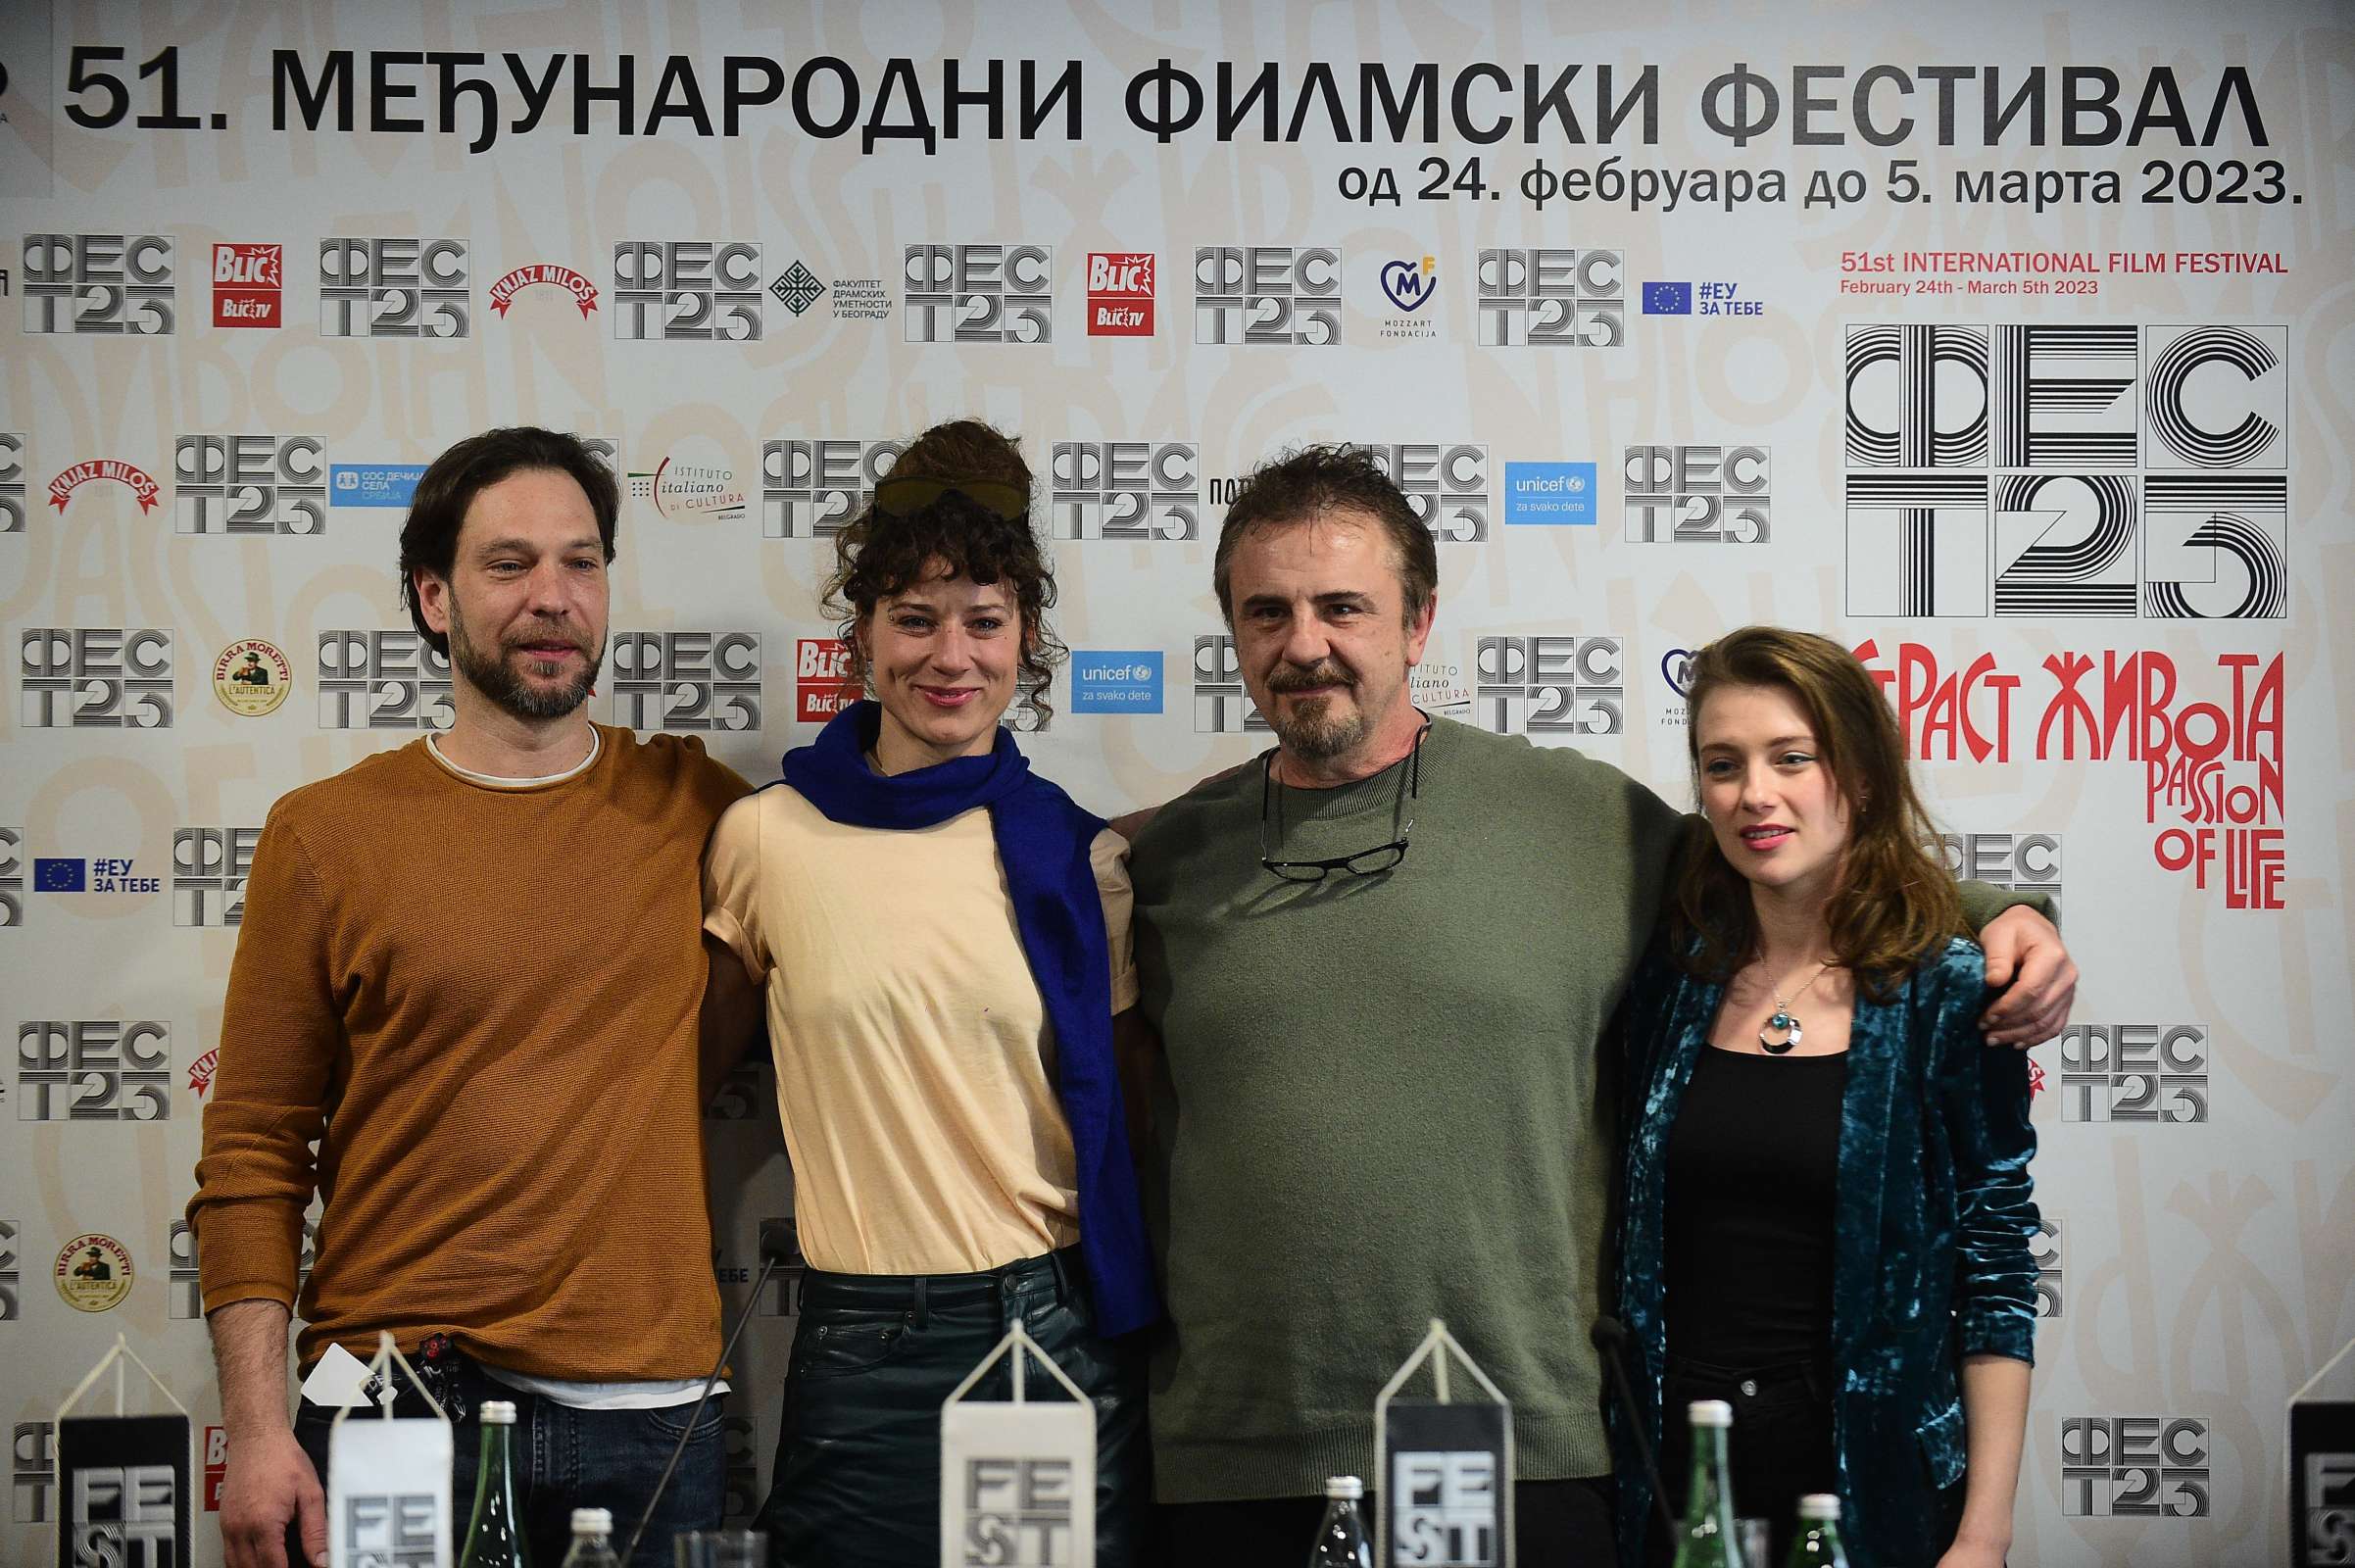 NEW MACEDONIAN AND CROATIAN FILMS PRESENTED AT 51ST FEST 